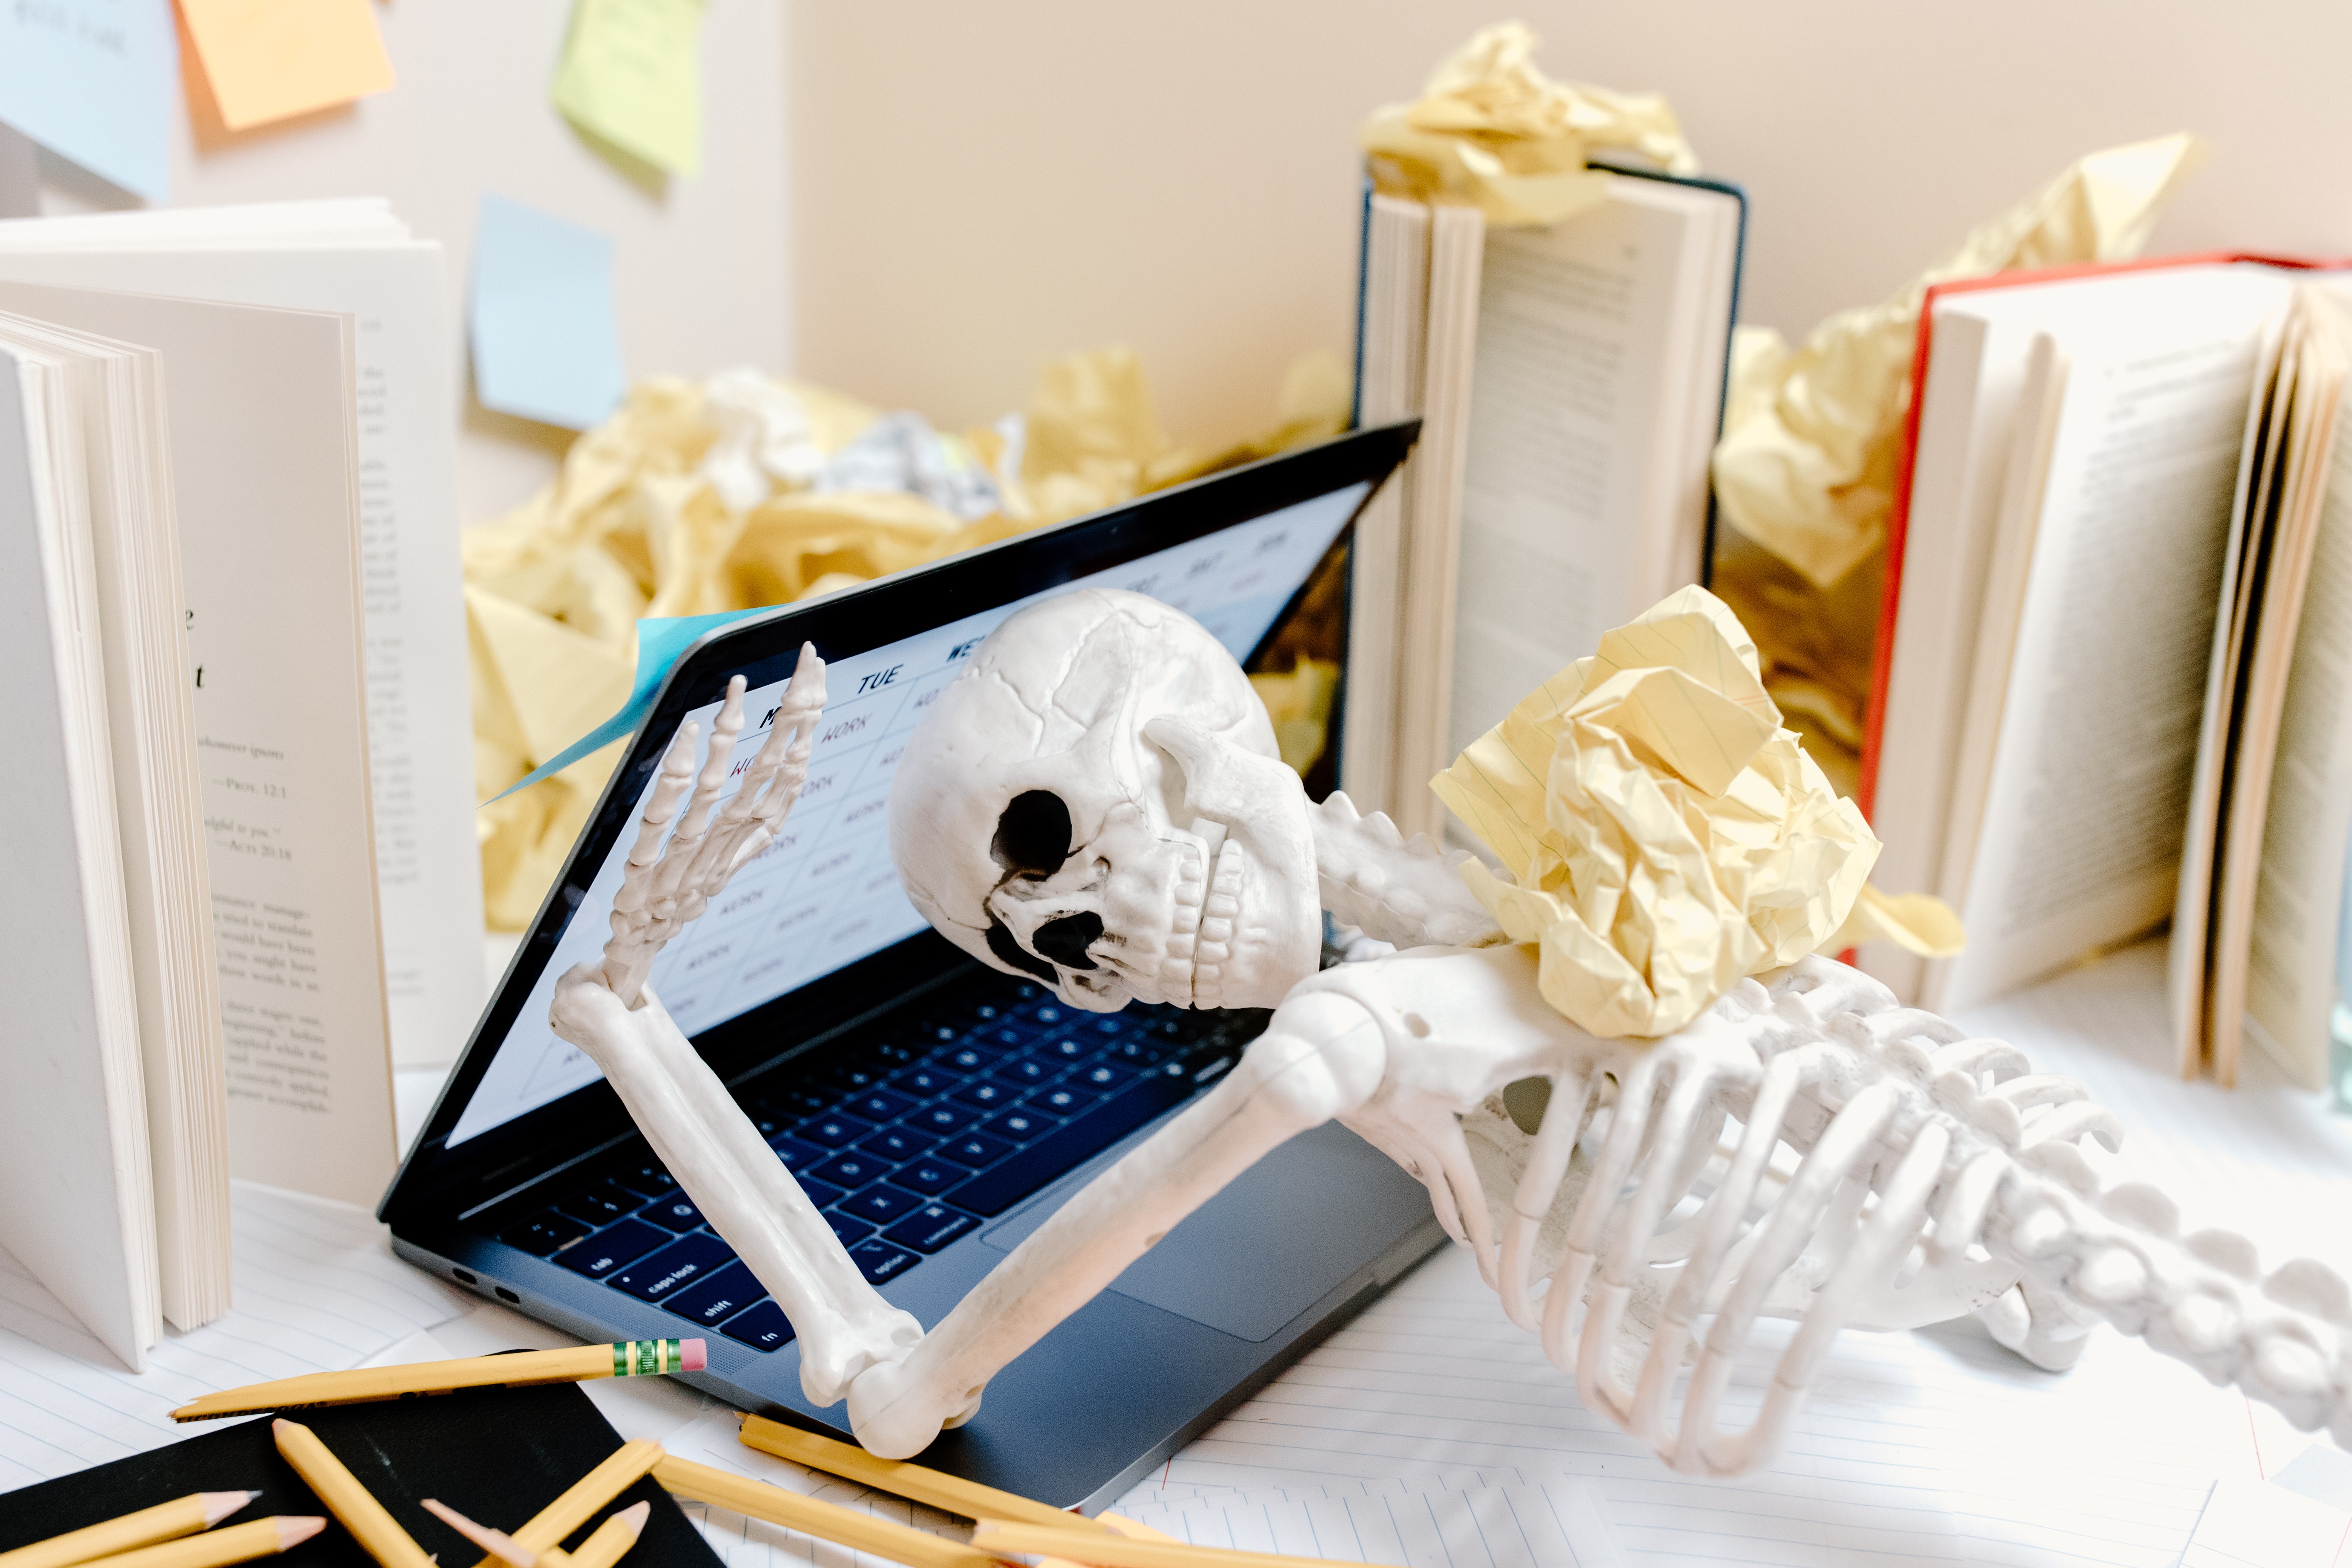 A skeleton with a laptop trying to close on its head